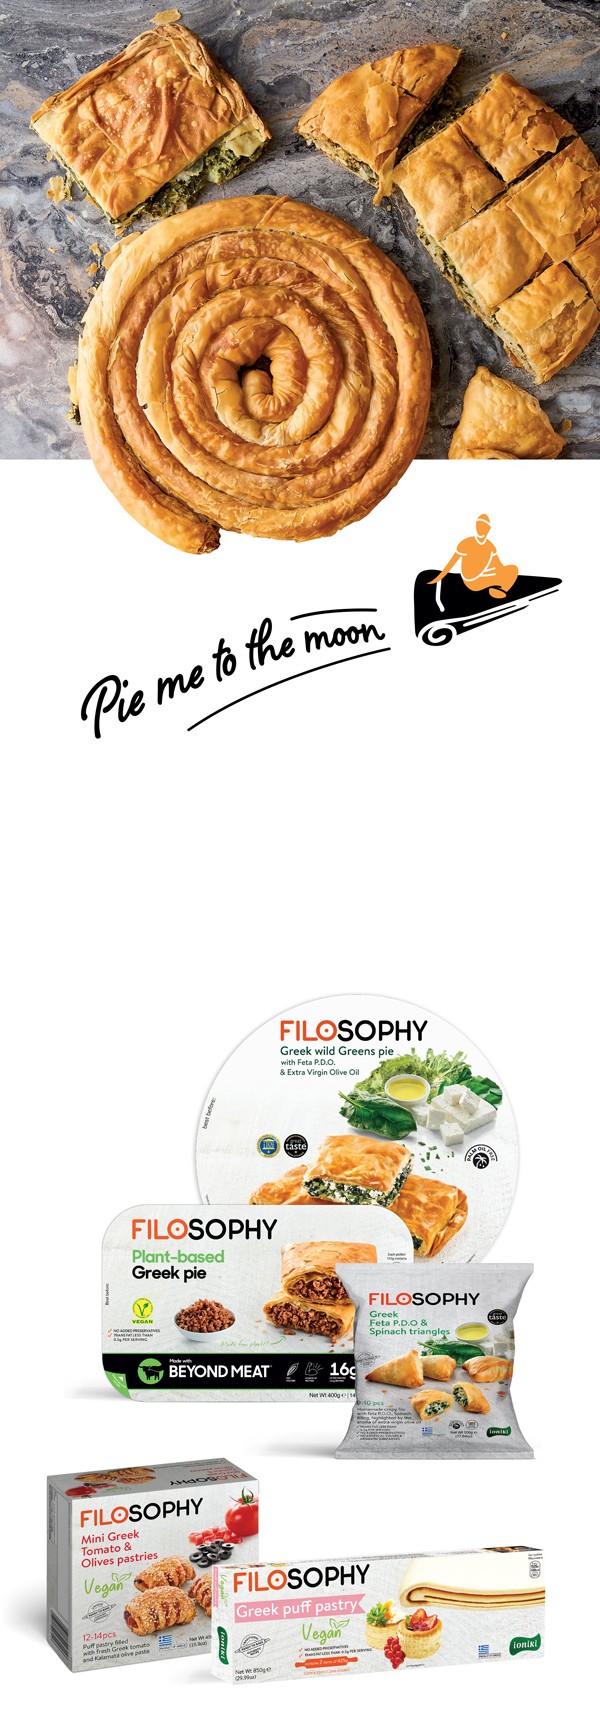 Ioniki filoshophy graphics and product images, Pie me to the moon